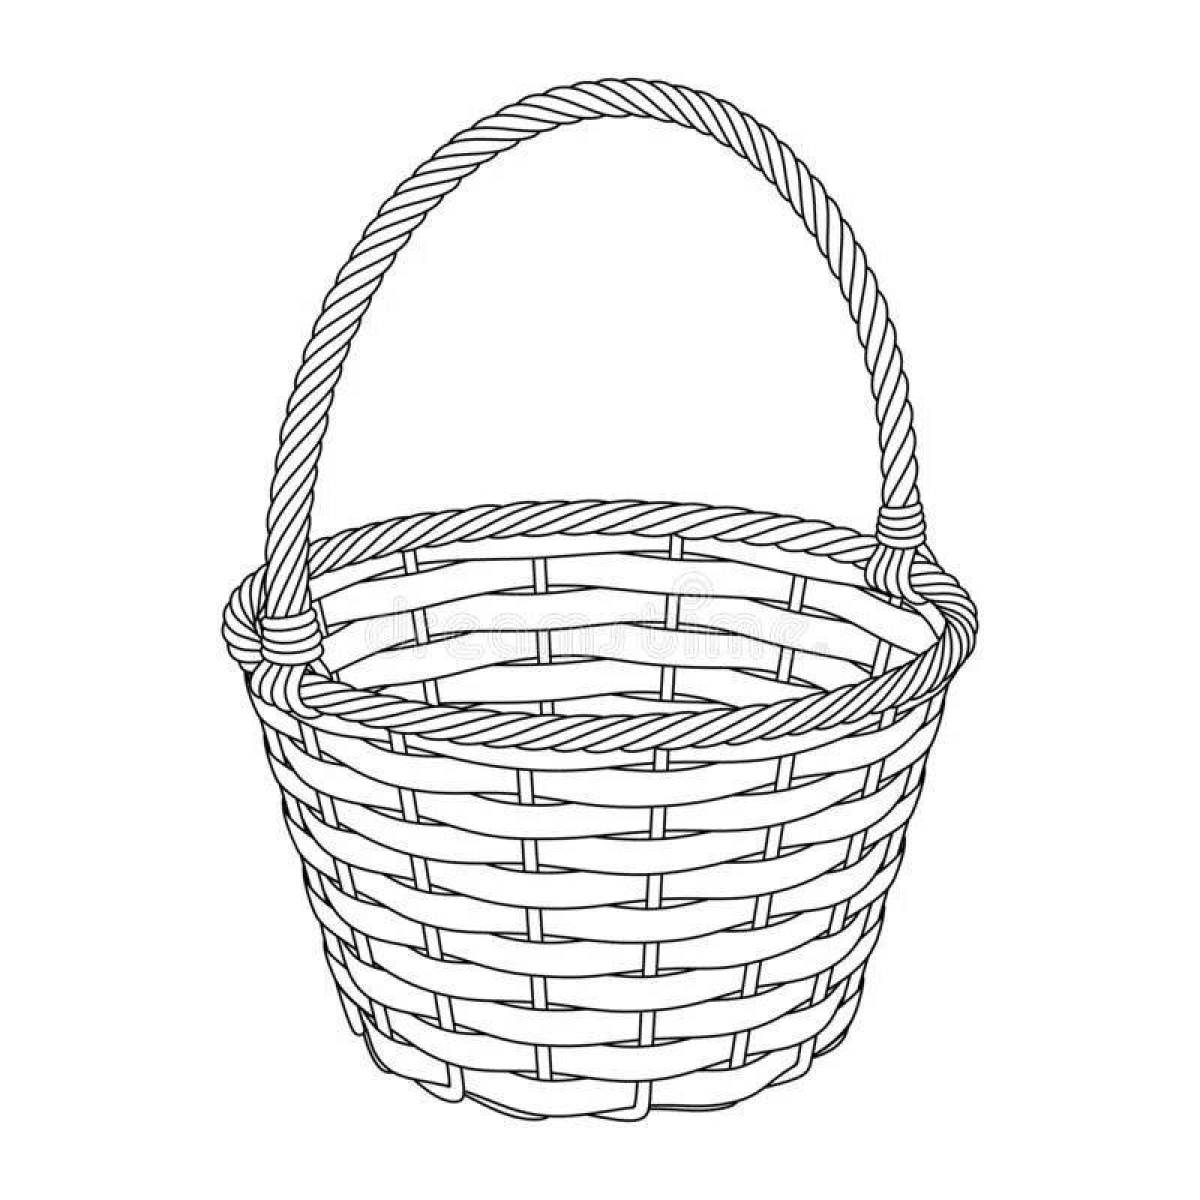 Coloring the fun basket is empty